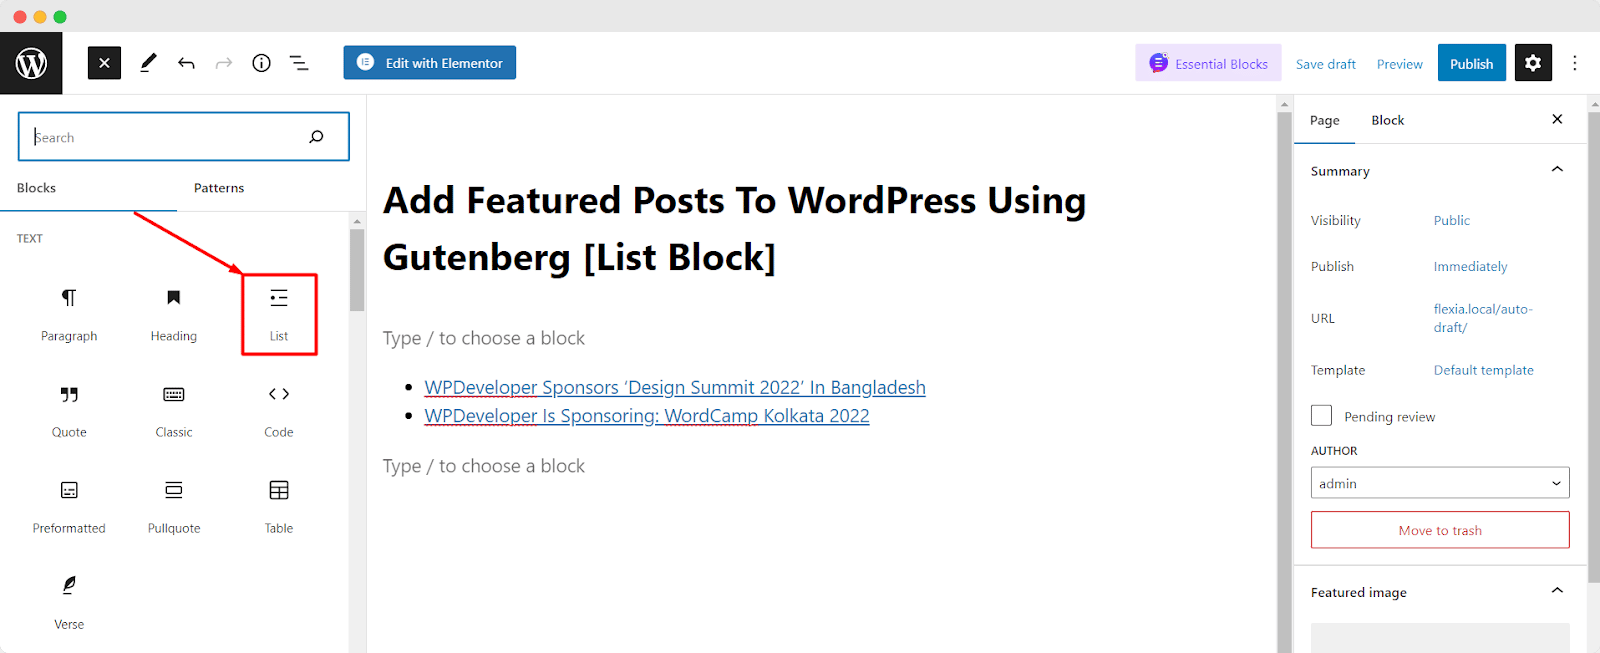 Featured Posts To WordPress